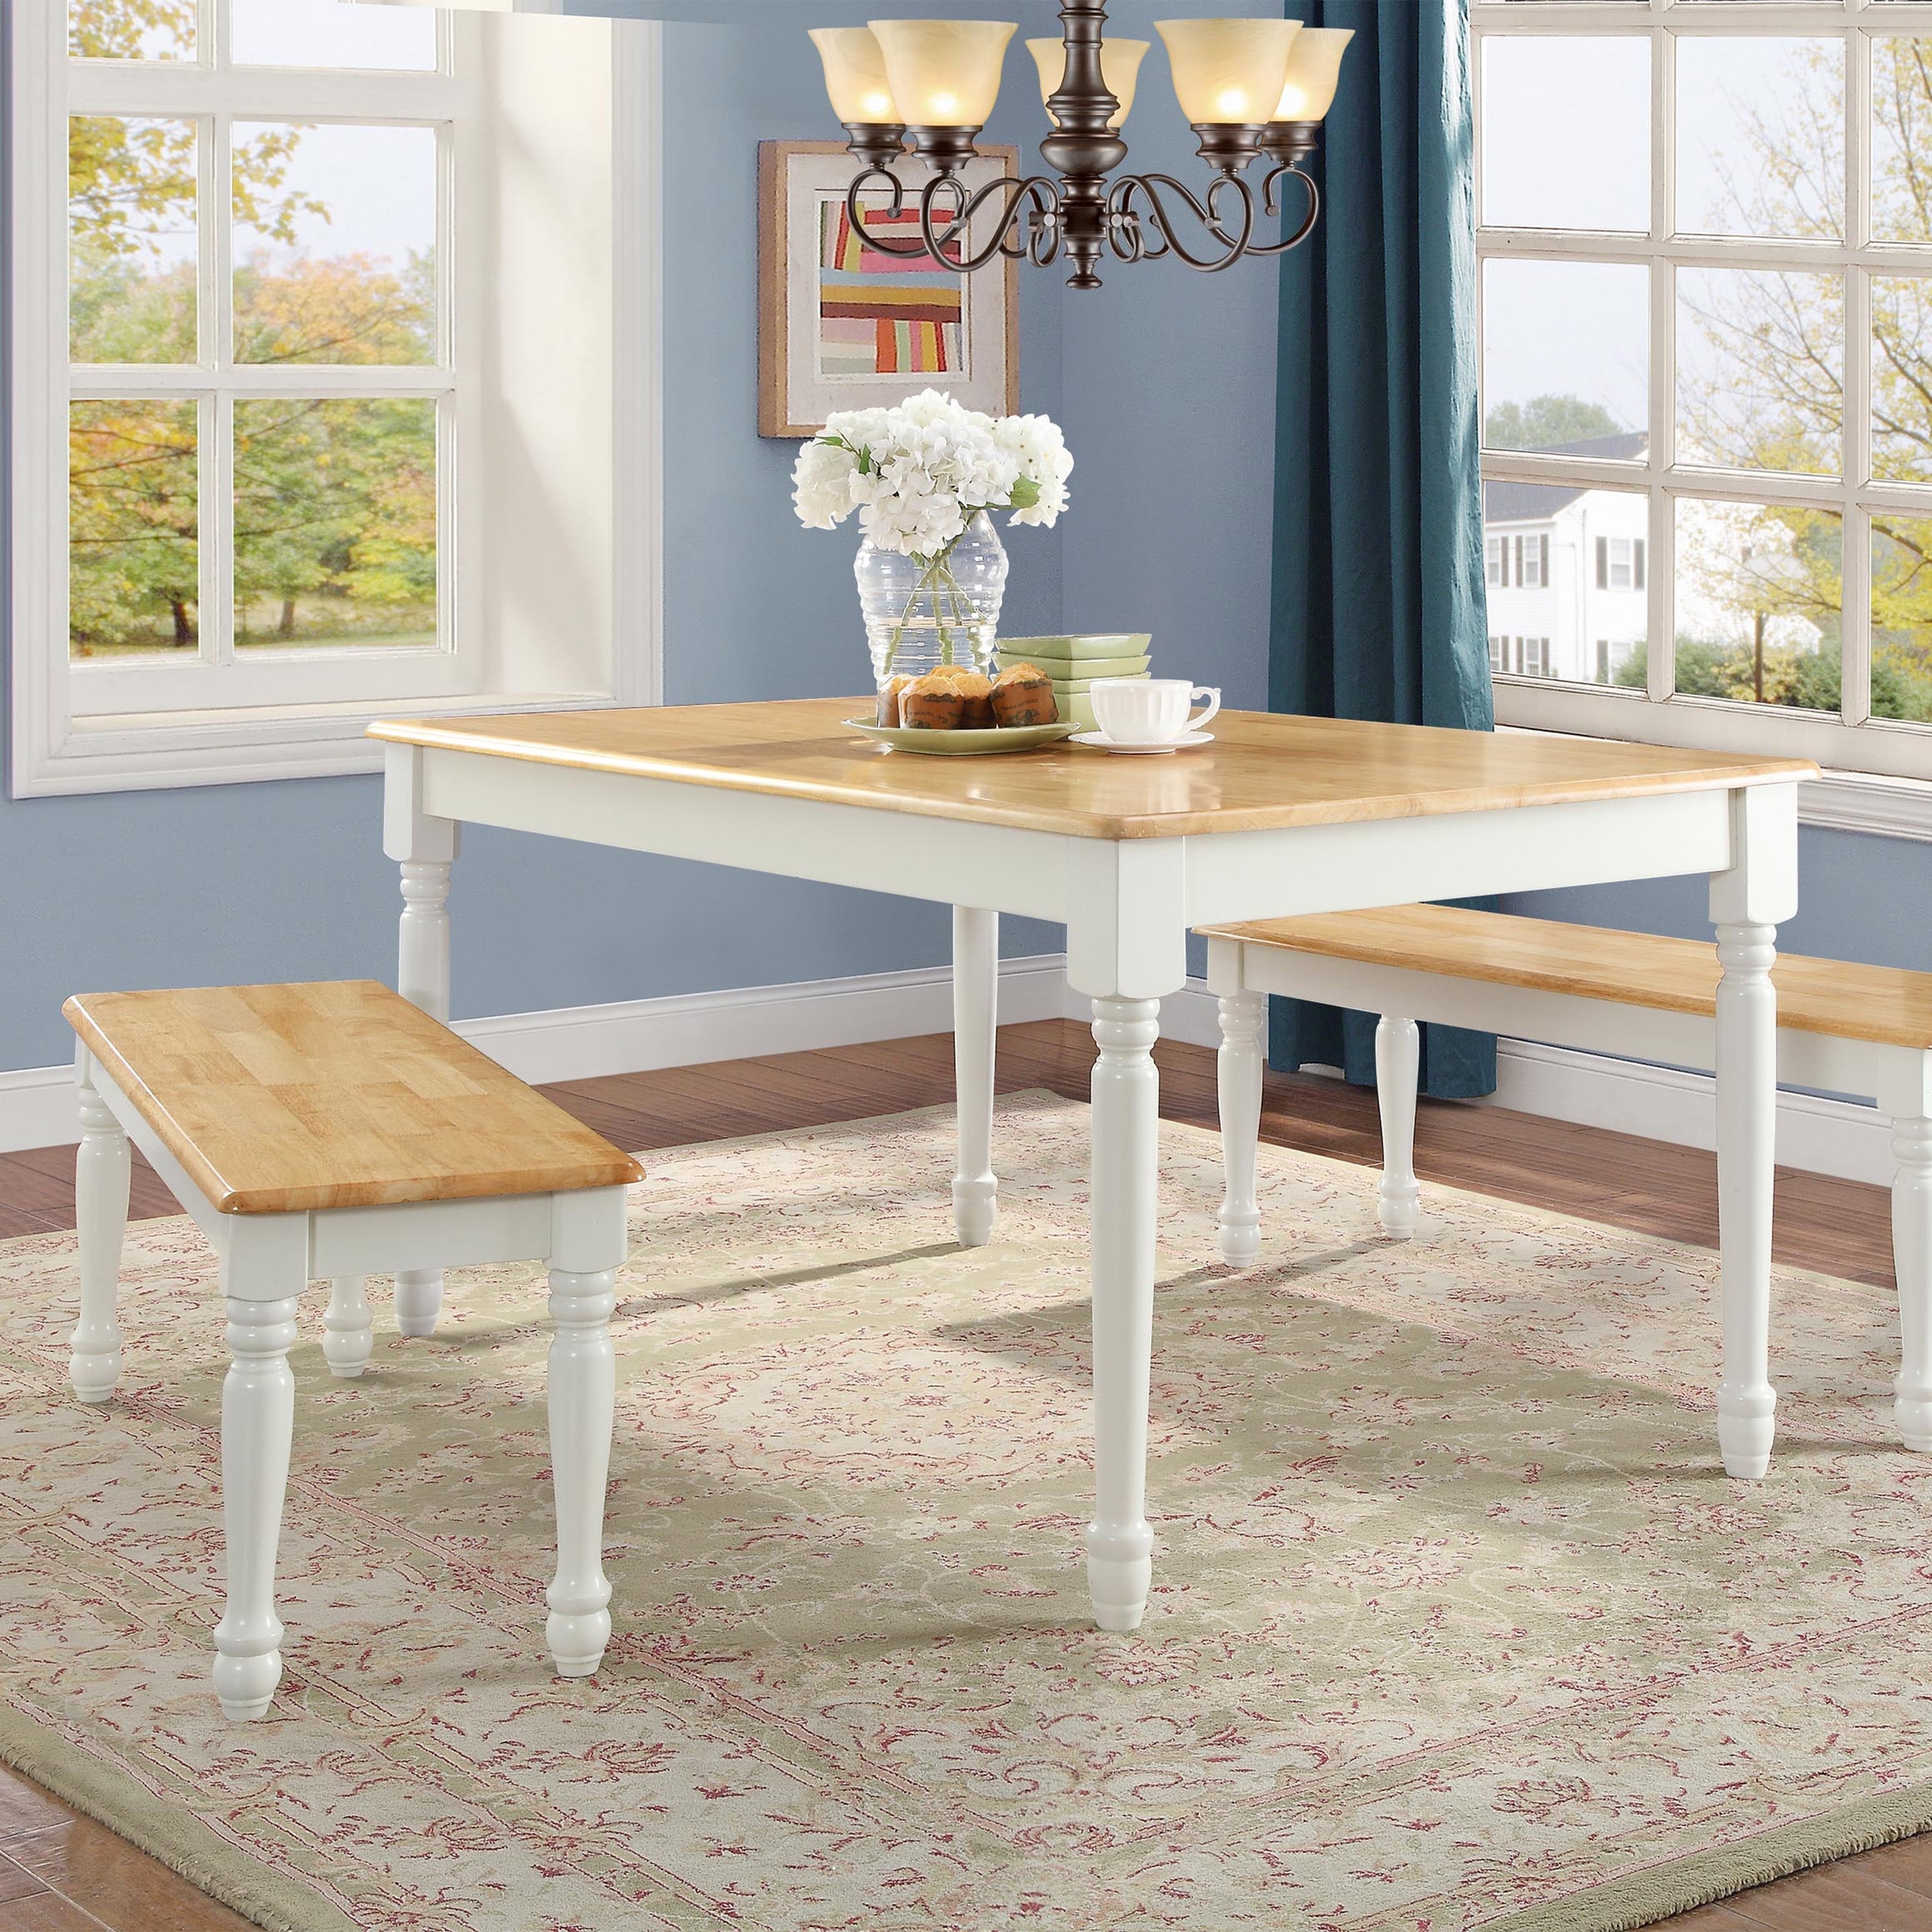 Better Homes and Gardens Autumn Lane 3-Piece Dining Set, White and Natural - image 1 of 3